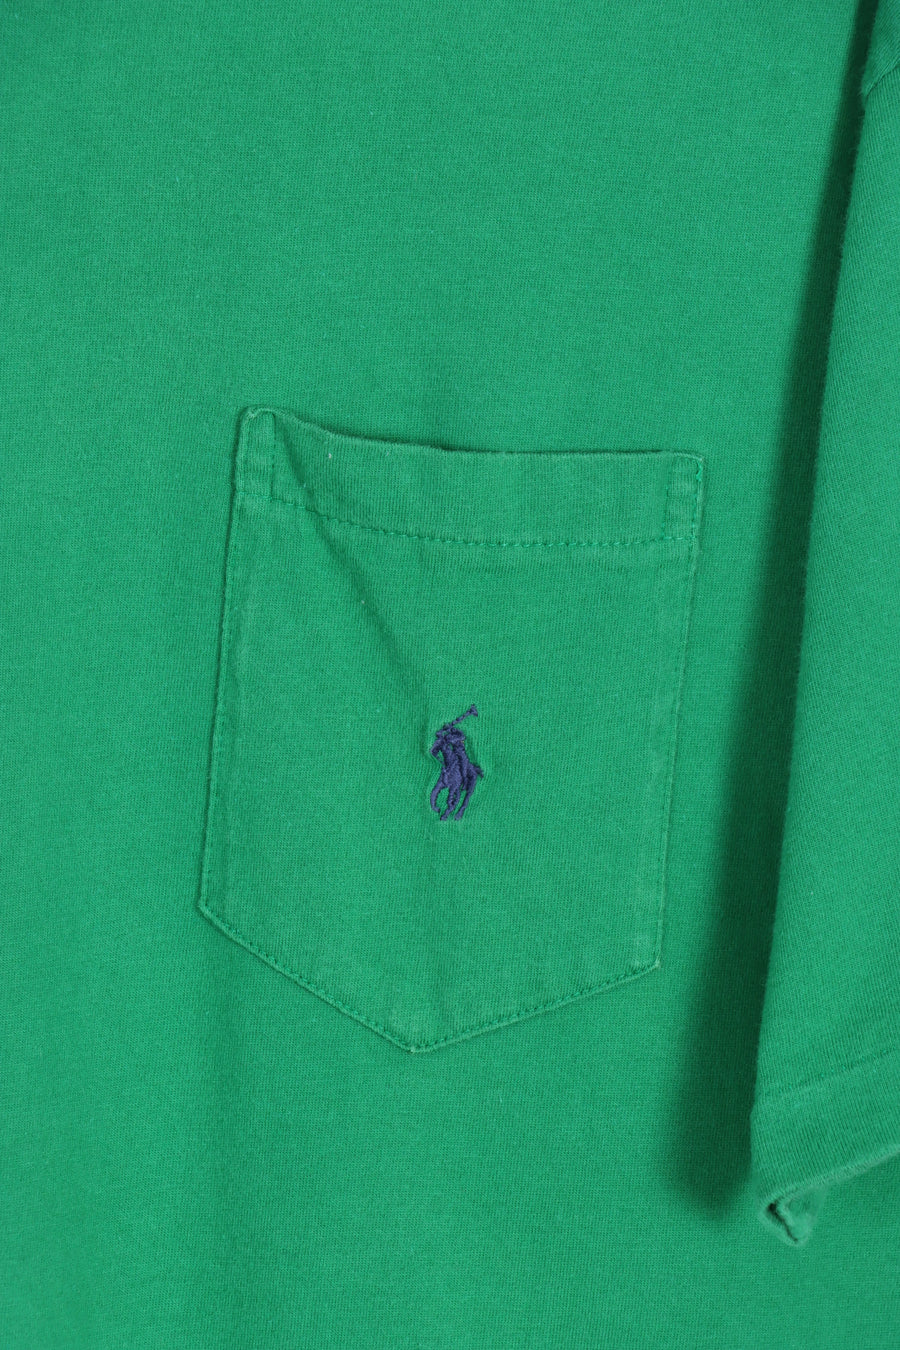 POLO RALPH LAUREN Green & Navy Embroidered Pocket Single Stitch Tee (M-L)